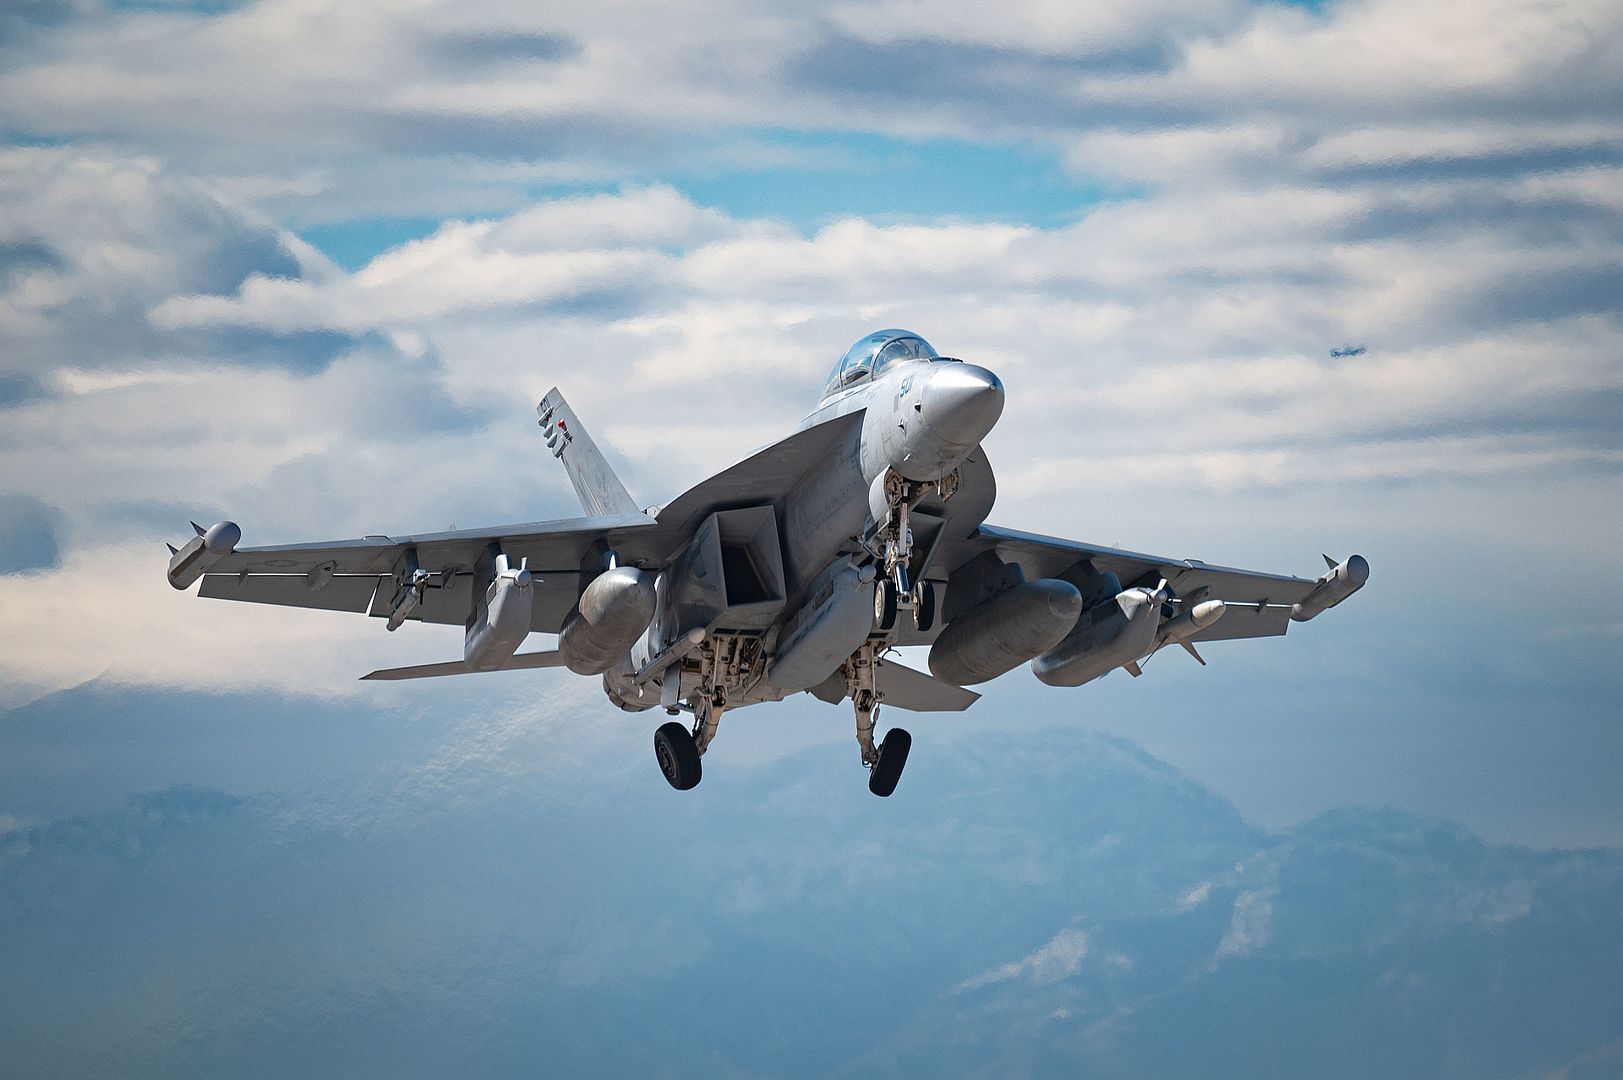 18G Growler Assigned To Electronic Attack Squadron 135 At Naval Air Station Whidbey Island